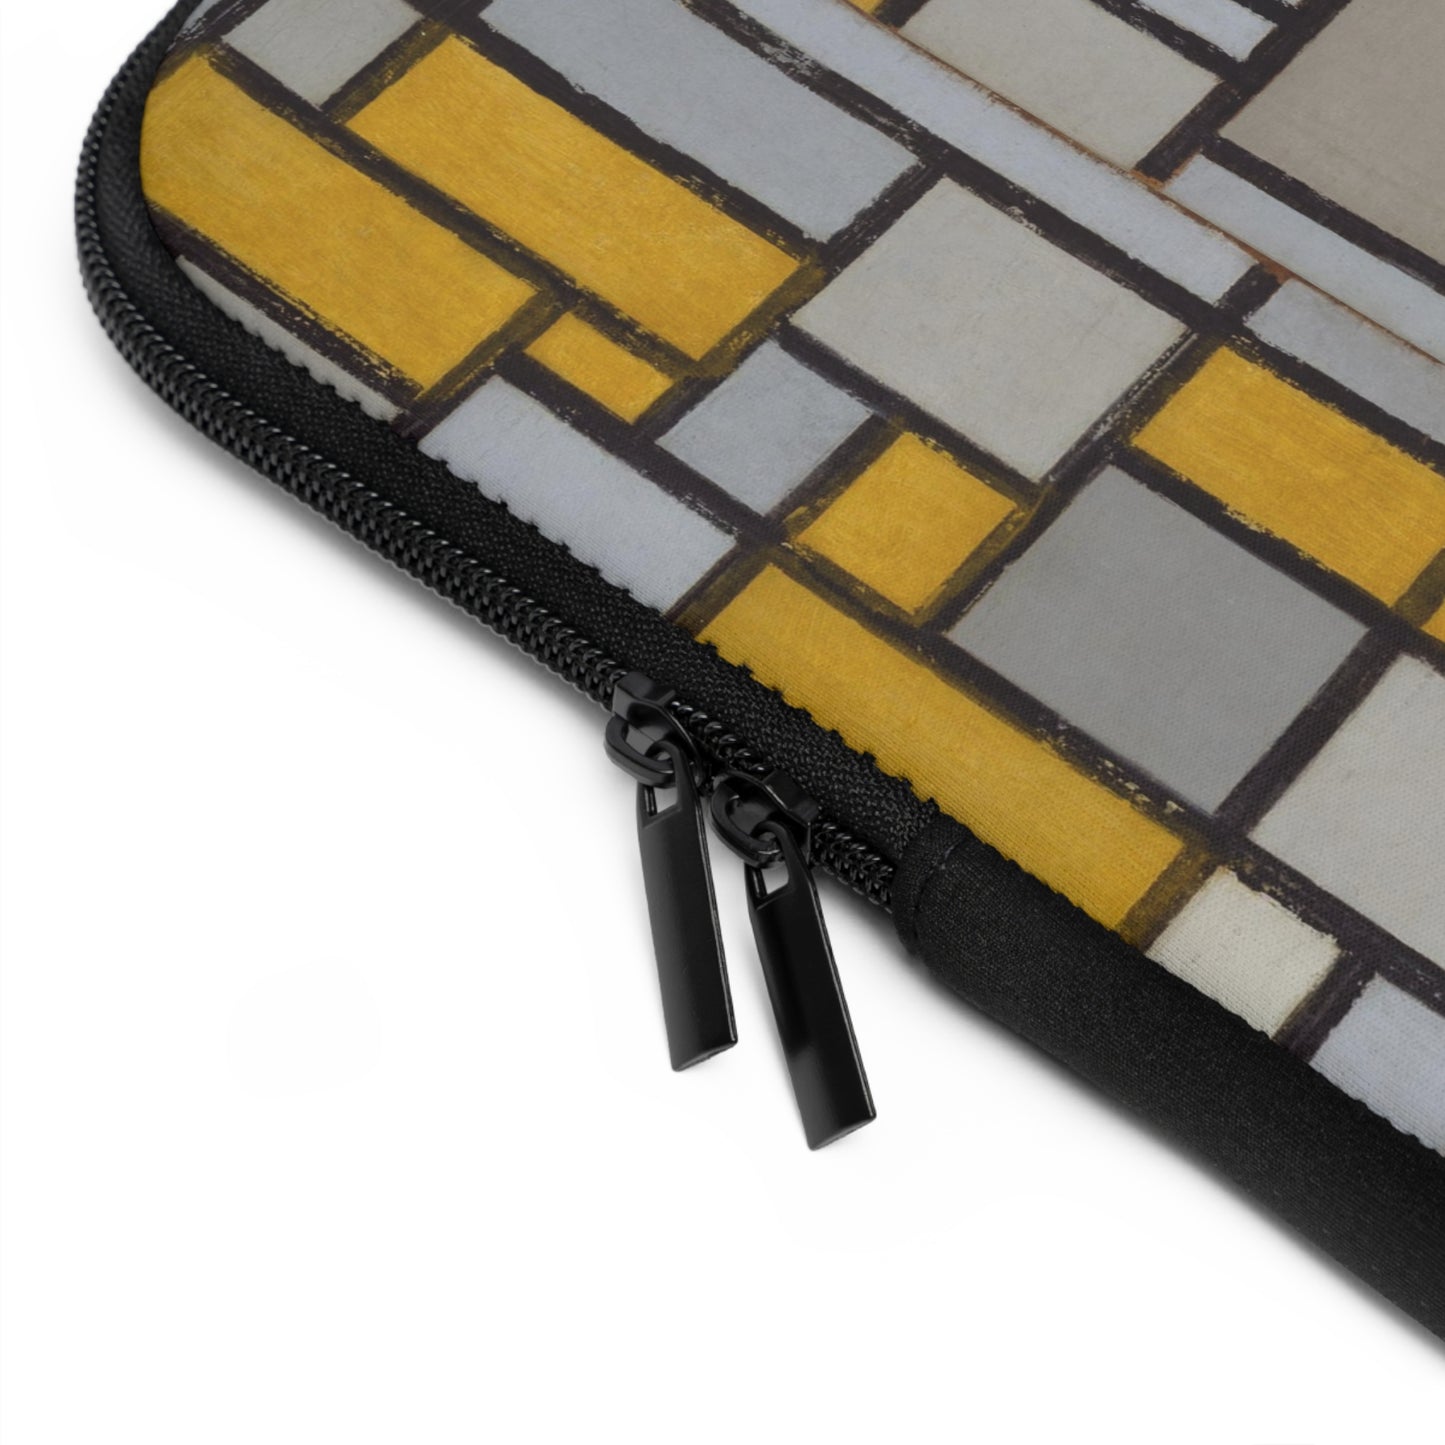 PIET MONDRIAN - COMPOSITION WITH GRID No. 1 - LAPTOP SLEEVE 